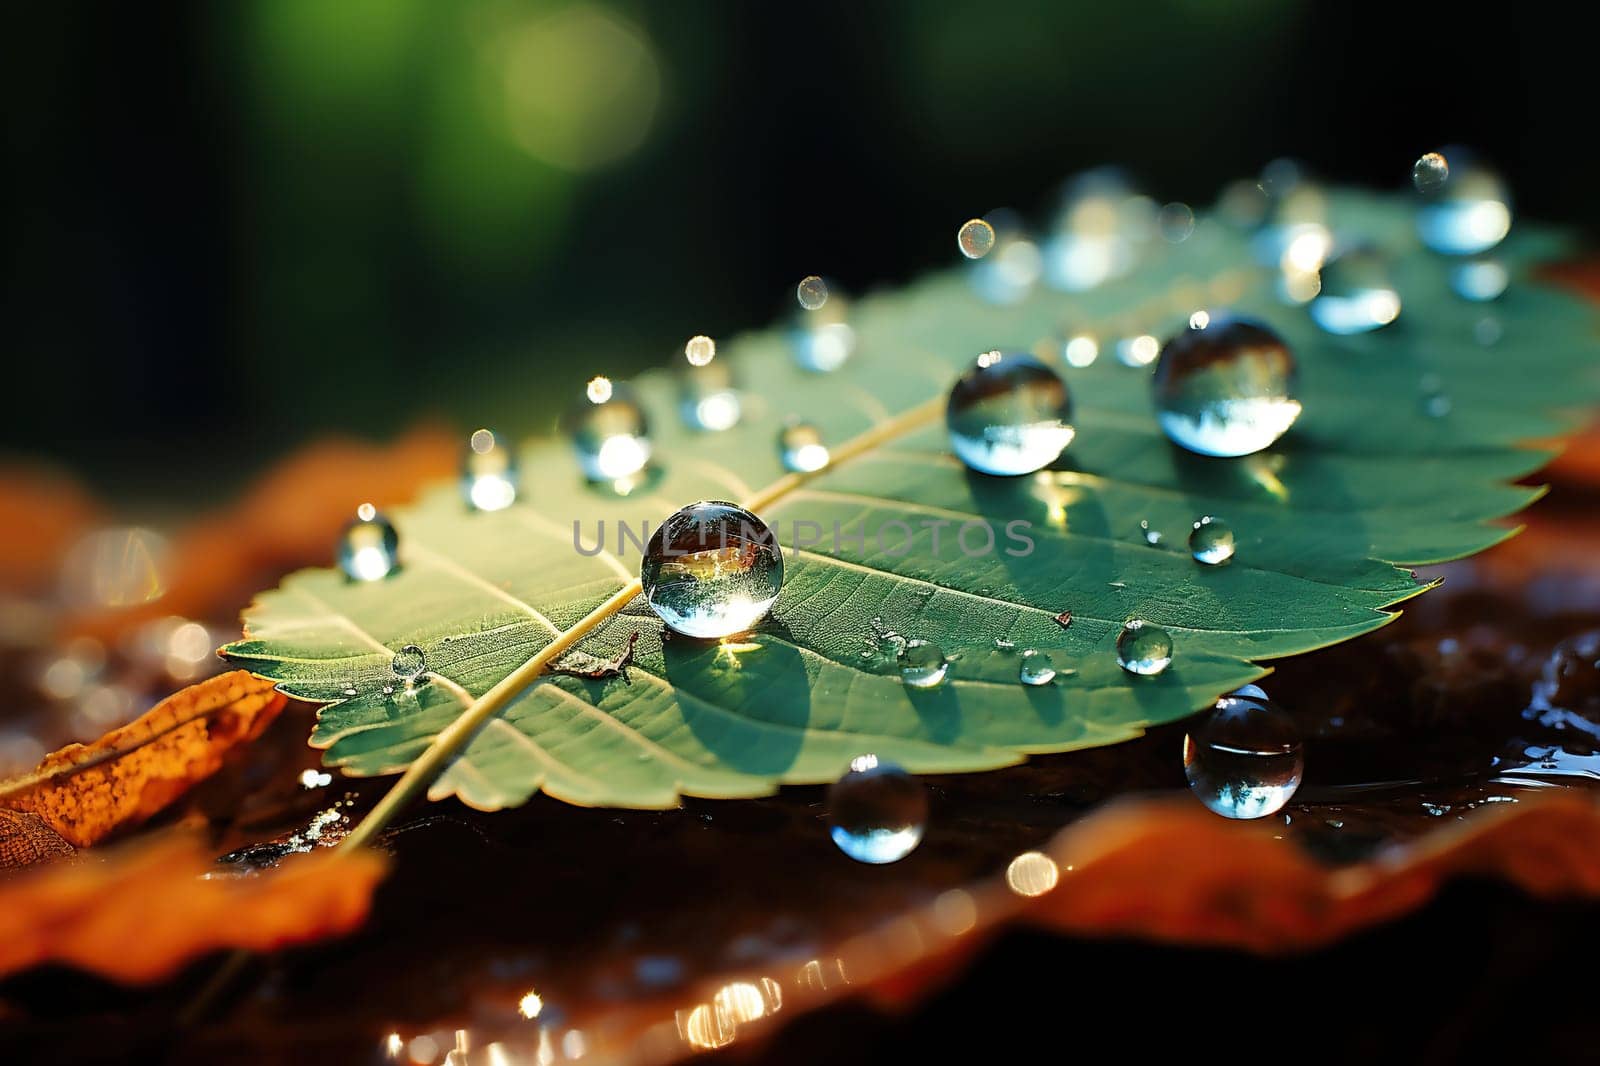 Large transparent drops of water, dew on a green leaf in nature. Environment conservation concept.